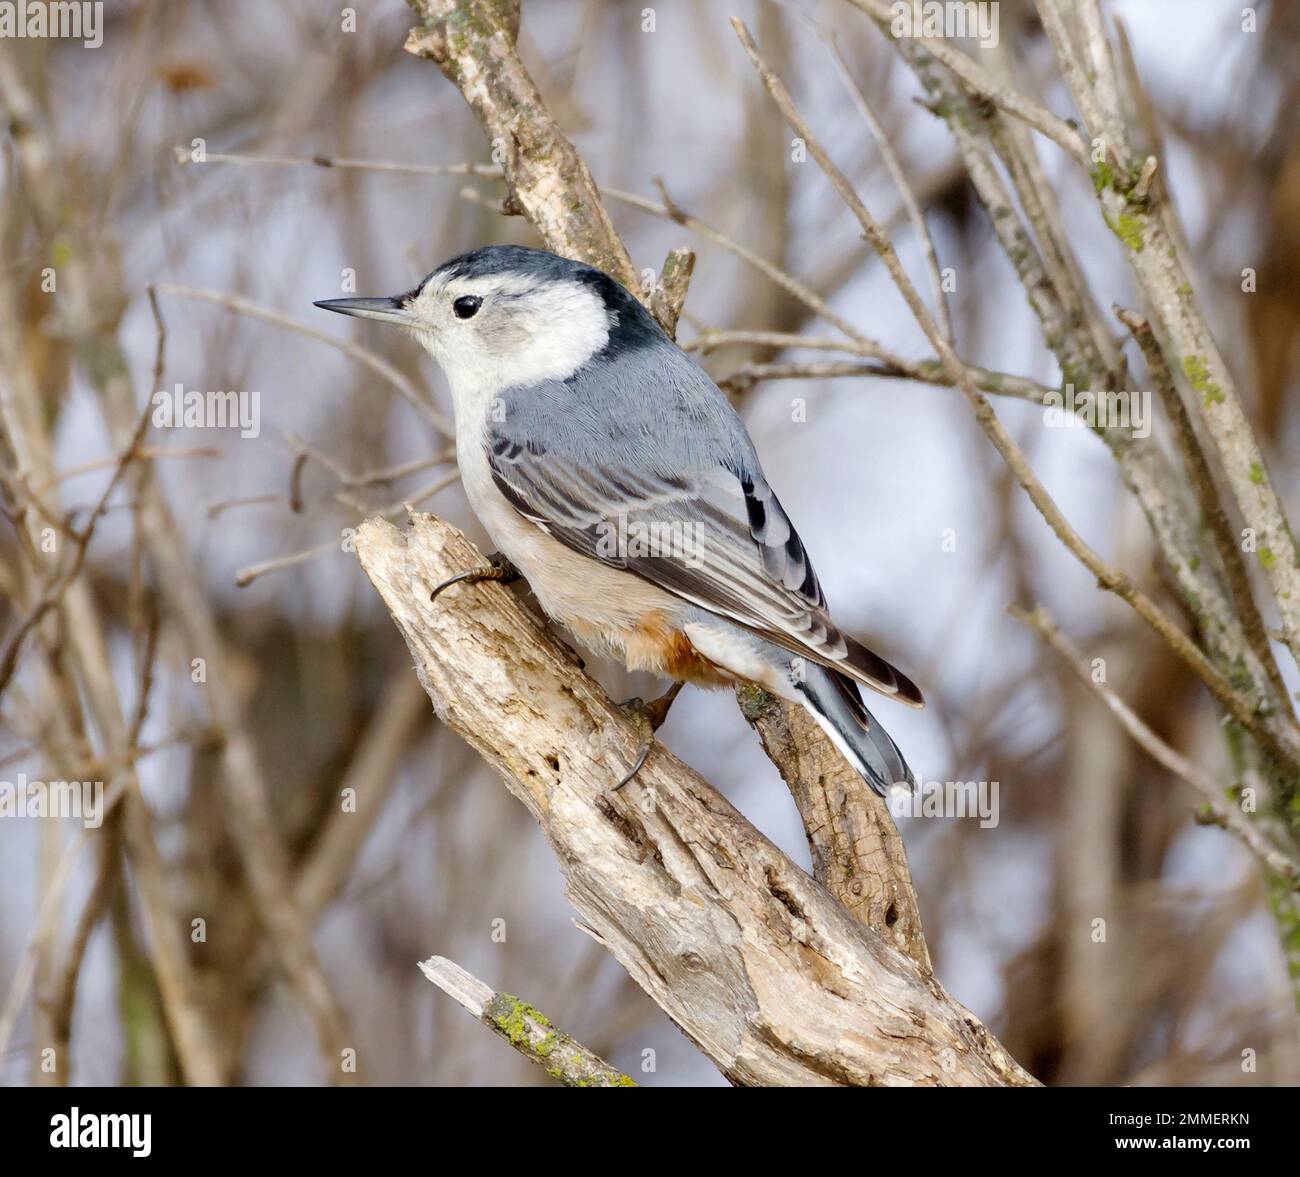 White Breasted Nuthatch, Sitta carolinensis, perched on branch. Stock Photo